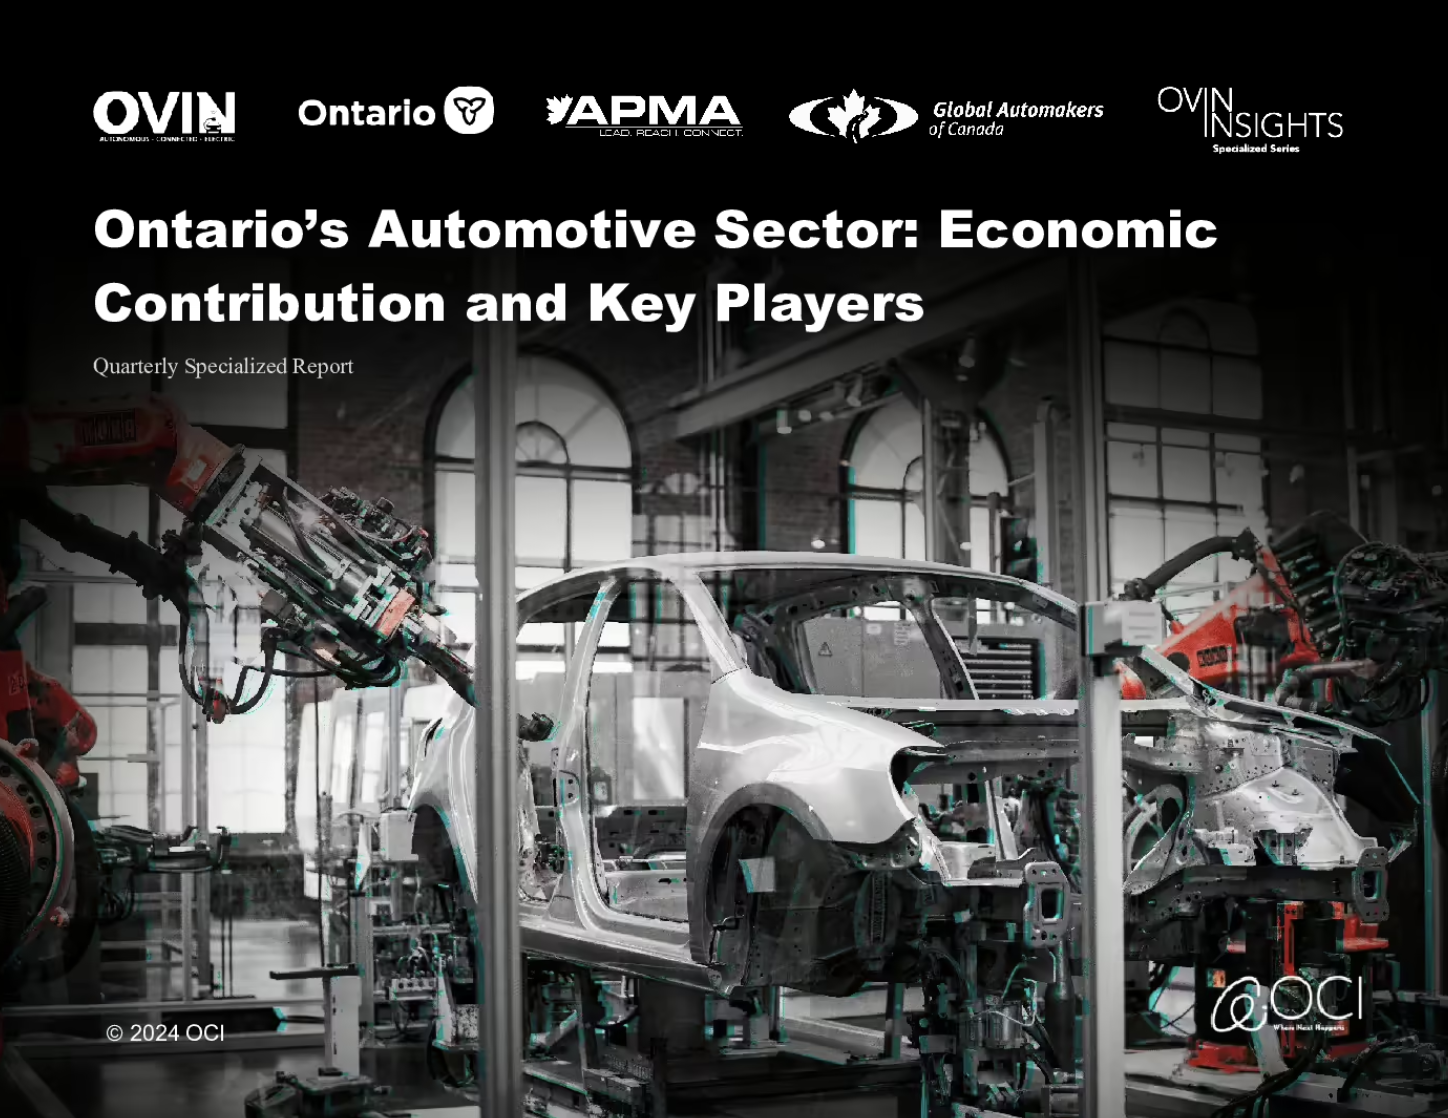 Ontario’s Automotive Sector: Economic Contribution and Key Players